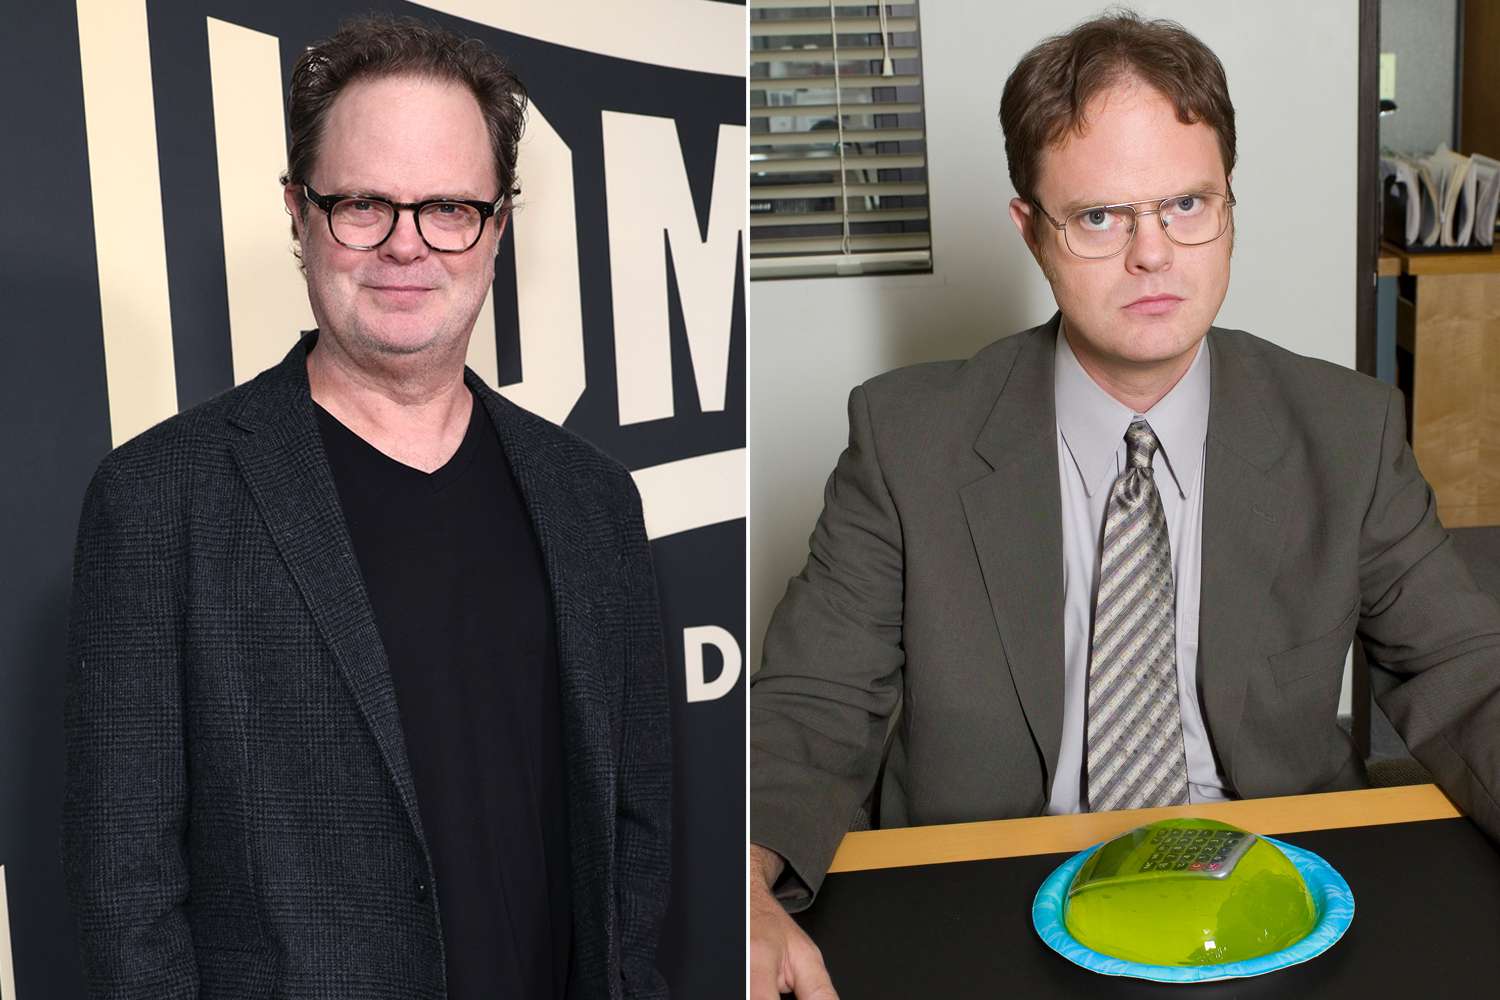 Rainn Wilson Hopes Fans 'Cool It with the Jell-O Jokes' Tied to His “Office” Role: 'Time to Move On' (Exclusive)